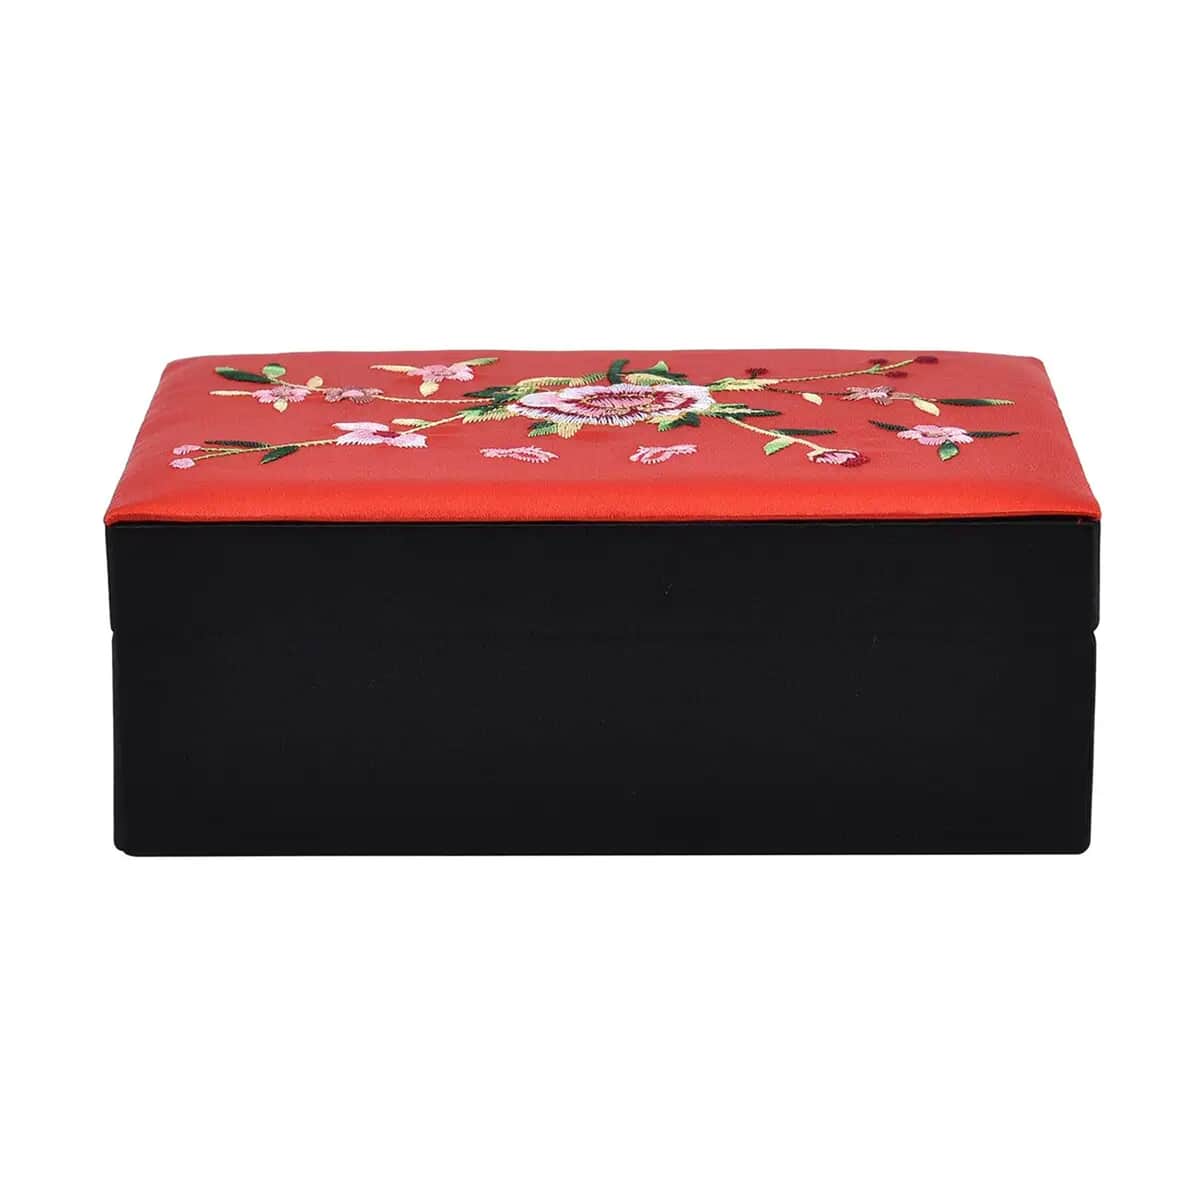 Red Flower Pattern Embroidery Satin Jewelry Box with Embroidery and Lock (6.89"x4.64"x2.56") image number 5